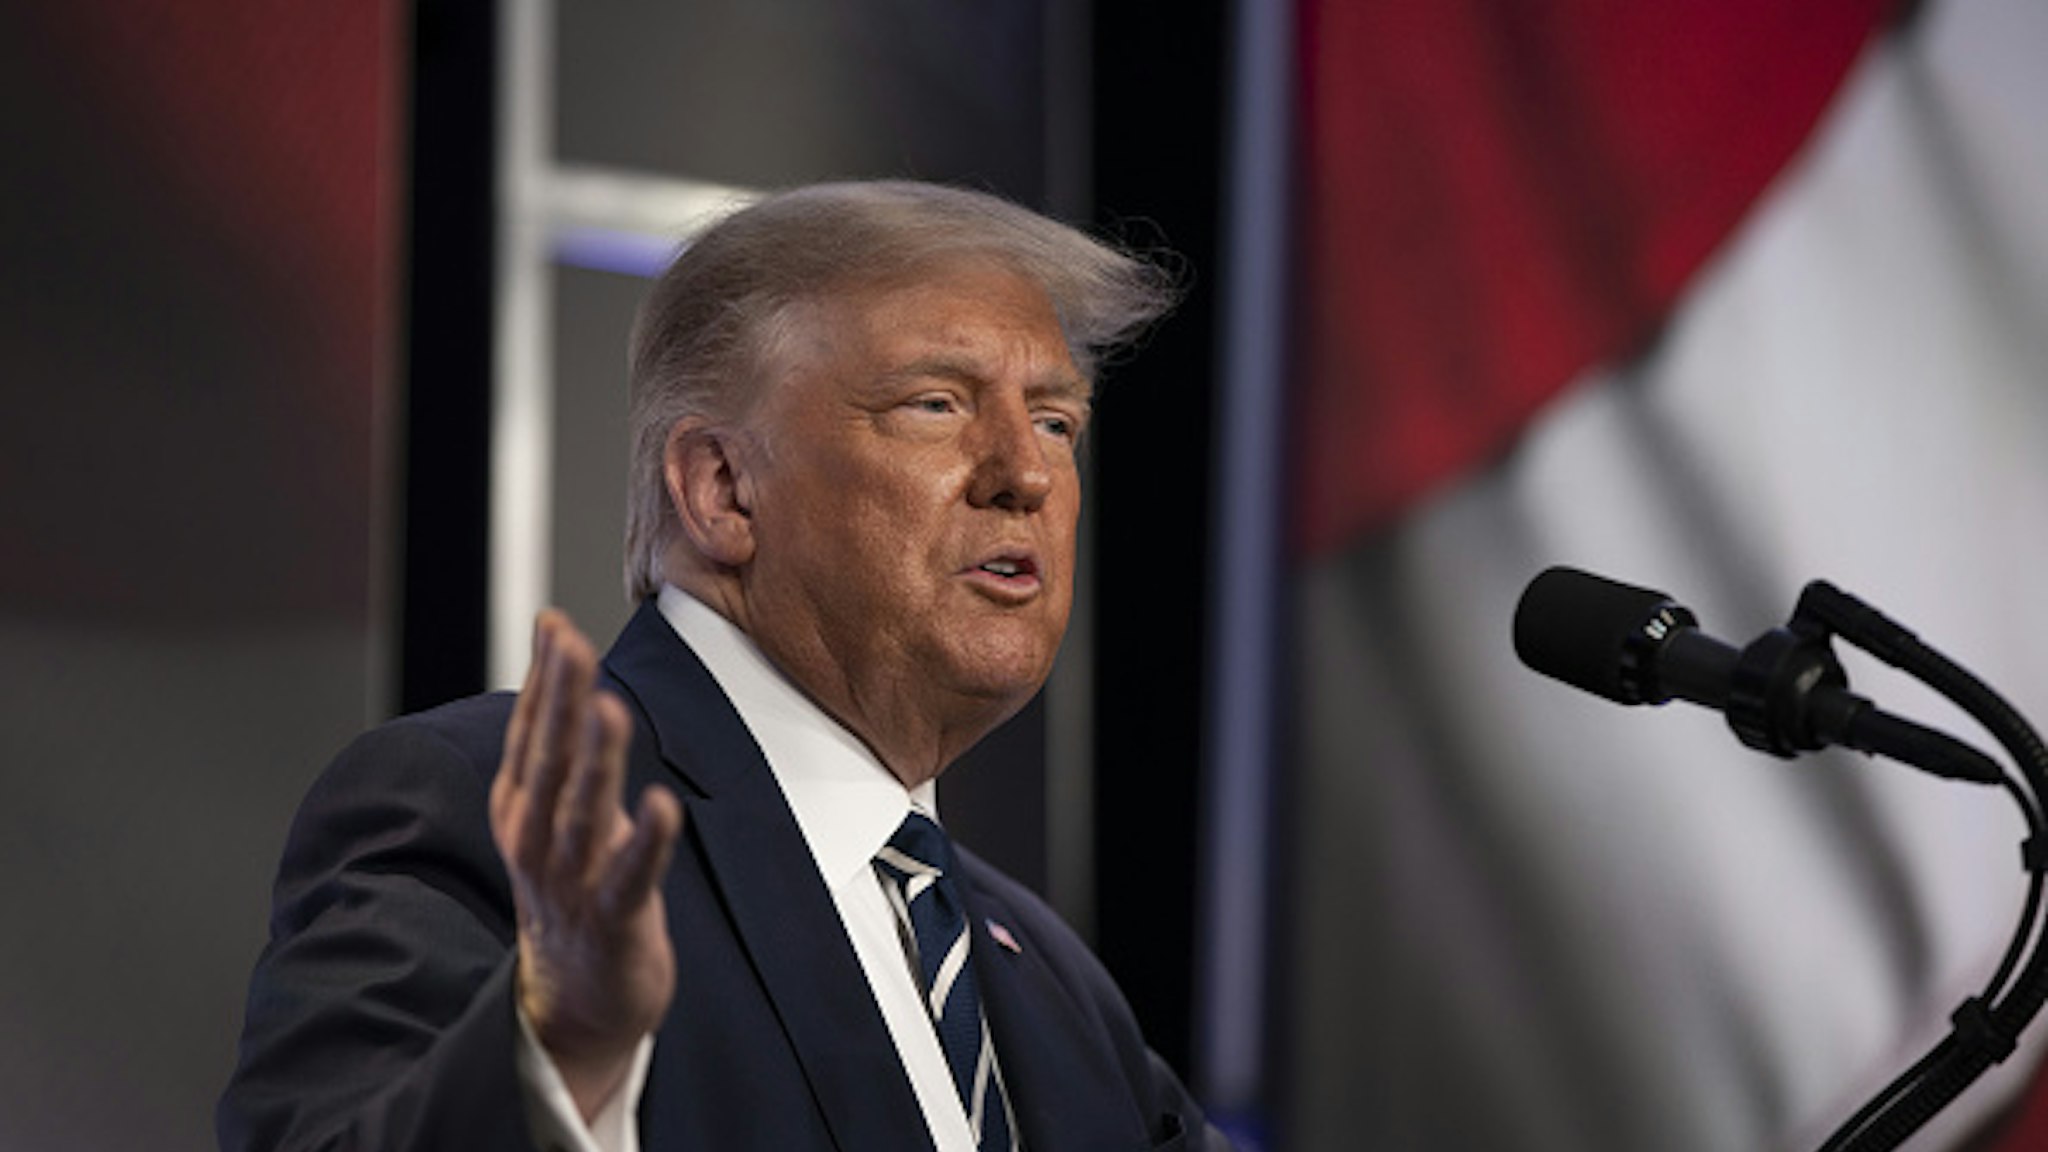 U.S. President Donald Trump speaks at the 2020 Council for National Policy Meeting in Arlington, Virginia, U.S., on Friday, Aug. 21, 2020. Trump said that he isn't trying to steal the election and that the results may not be known for weeks.